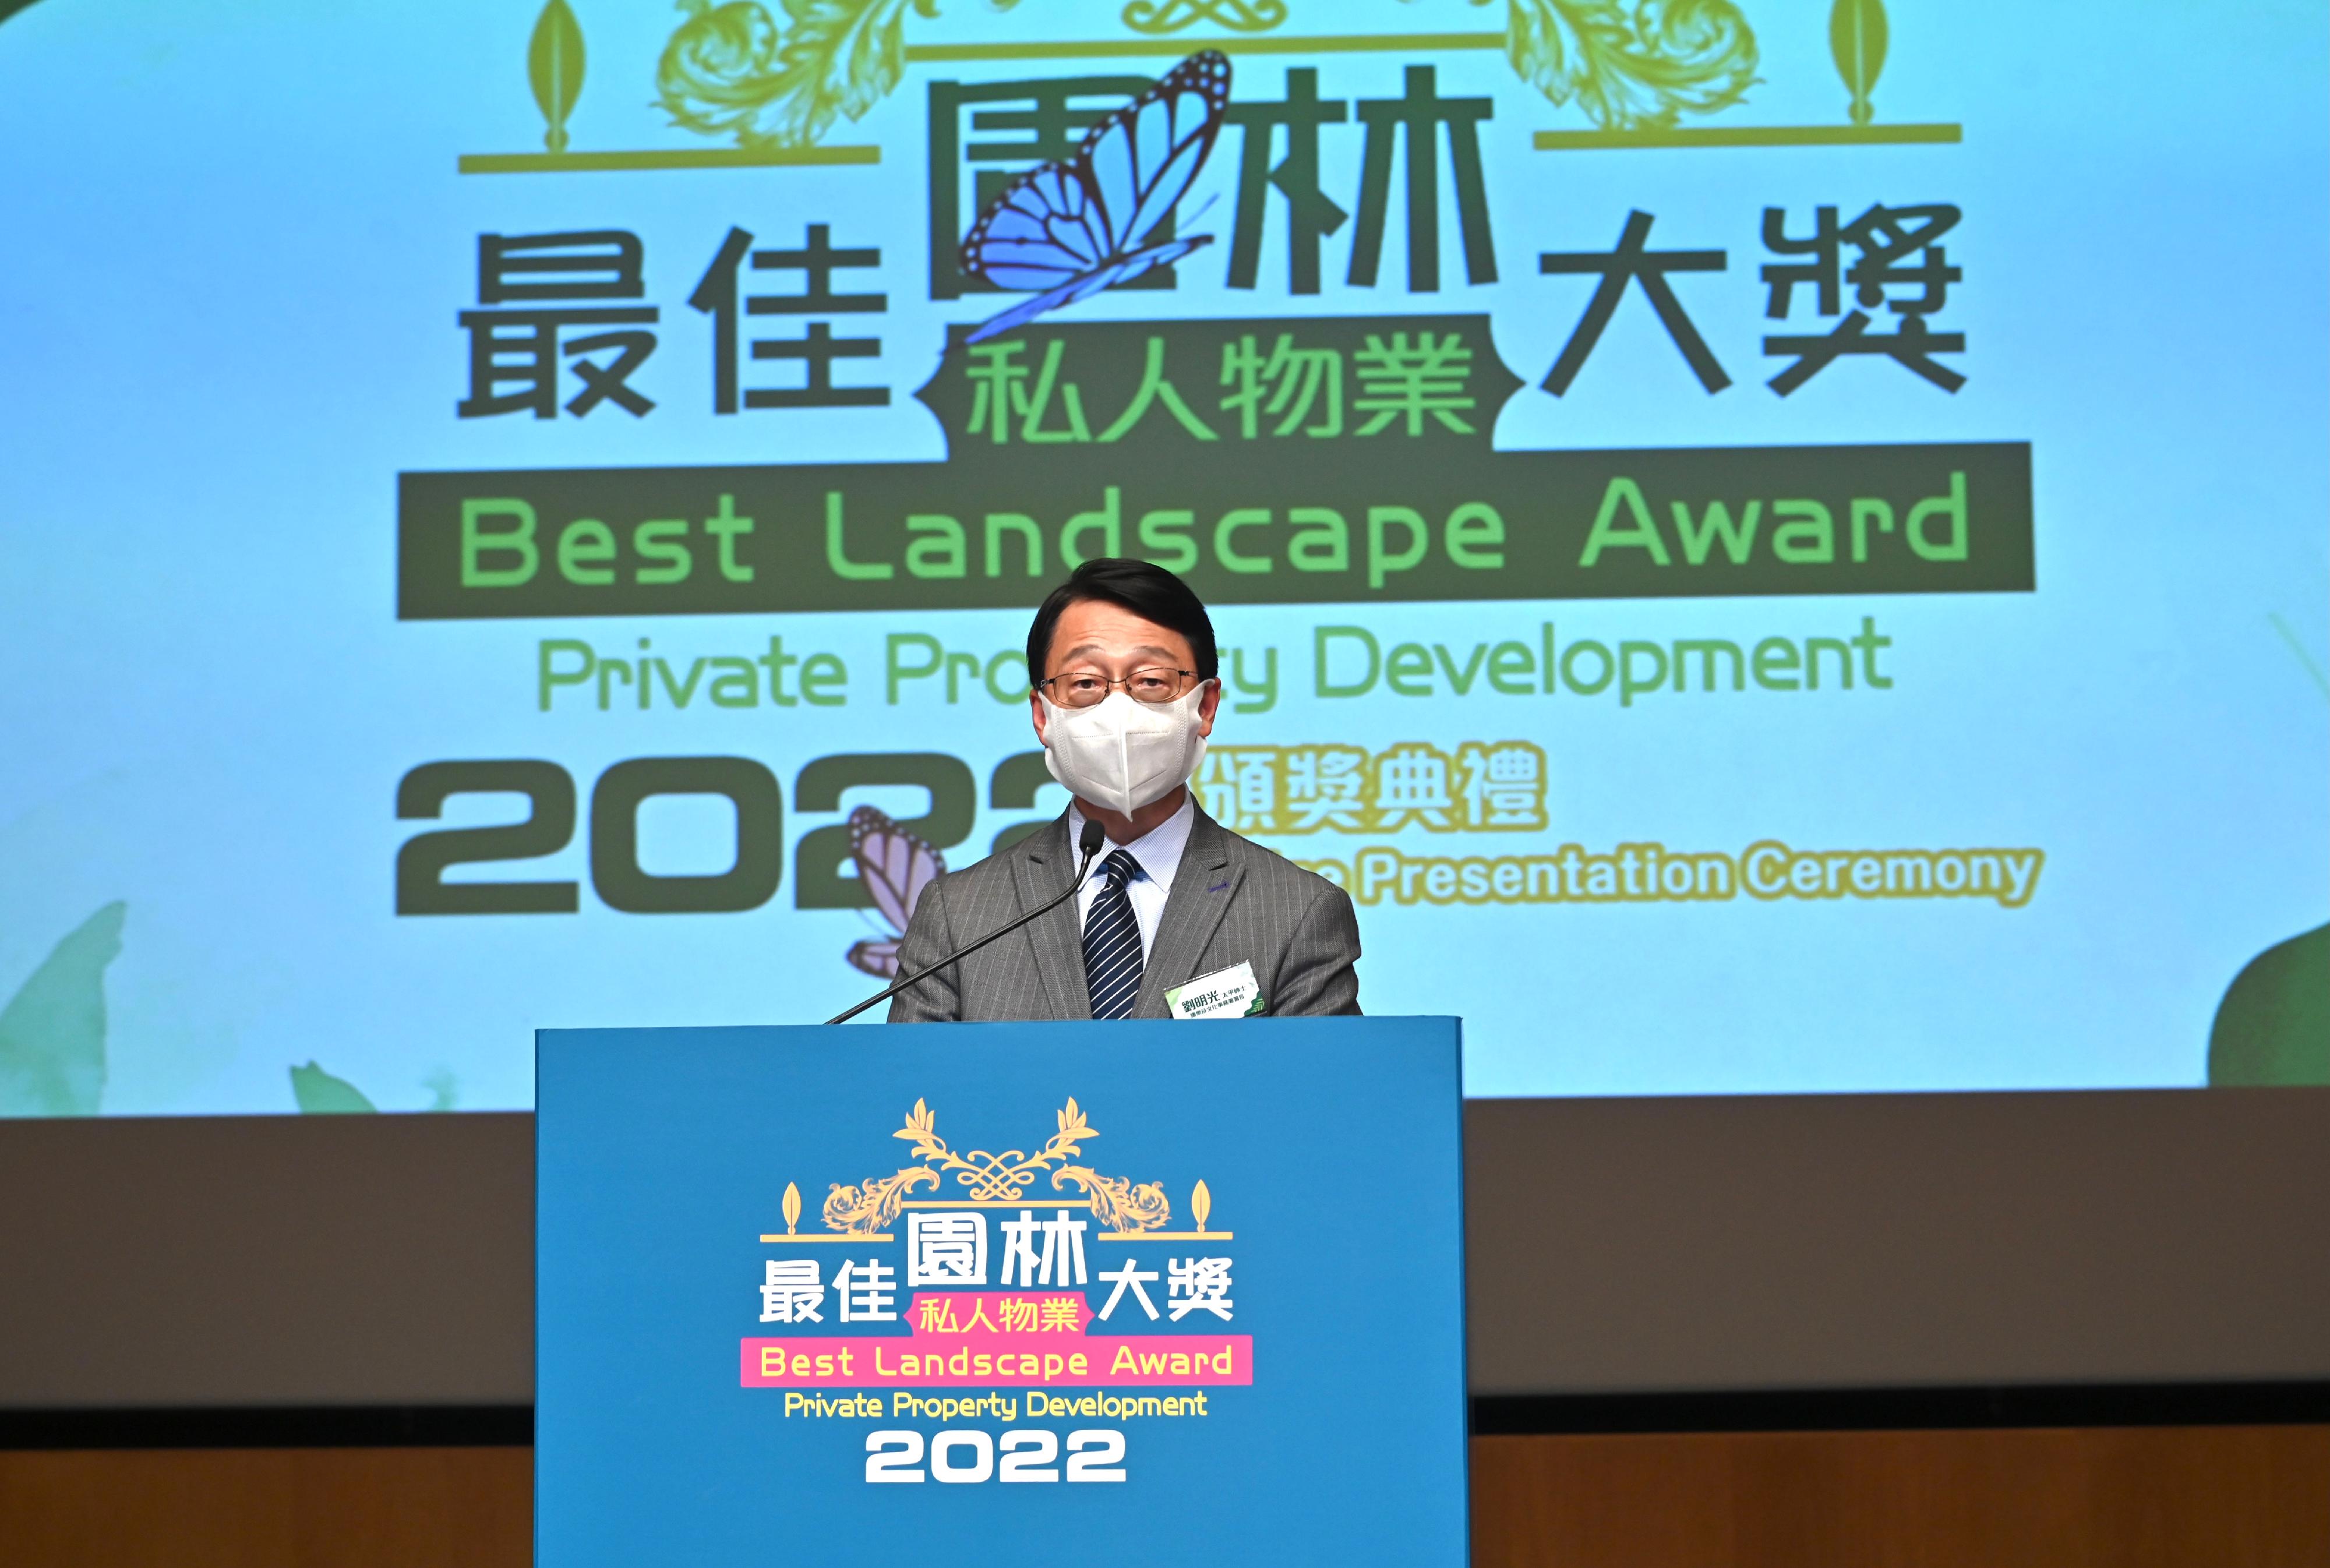 The winners of the Best Landscape Award for Private Property Development 2022, organised by the Leisure and Cultural Services Department, were announced at a prize presentation ceremony today (November 17) to commend organisations for their efforts in greening. Photo shows the Director of Leisure and Cultural Services, Mr Vincent Liu, delivering a speech at the ceremony. He said the response to the awards was encouraging, with 212 nominated entries received this year.